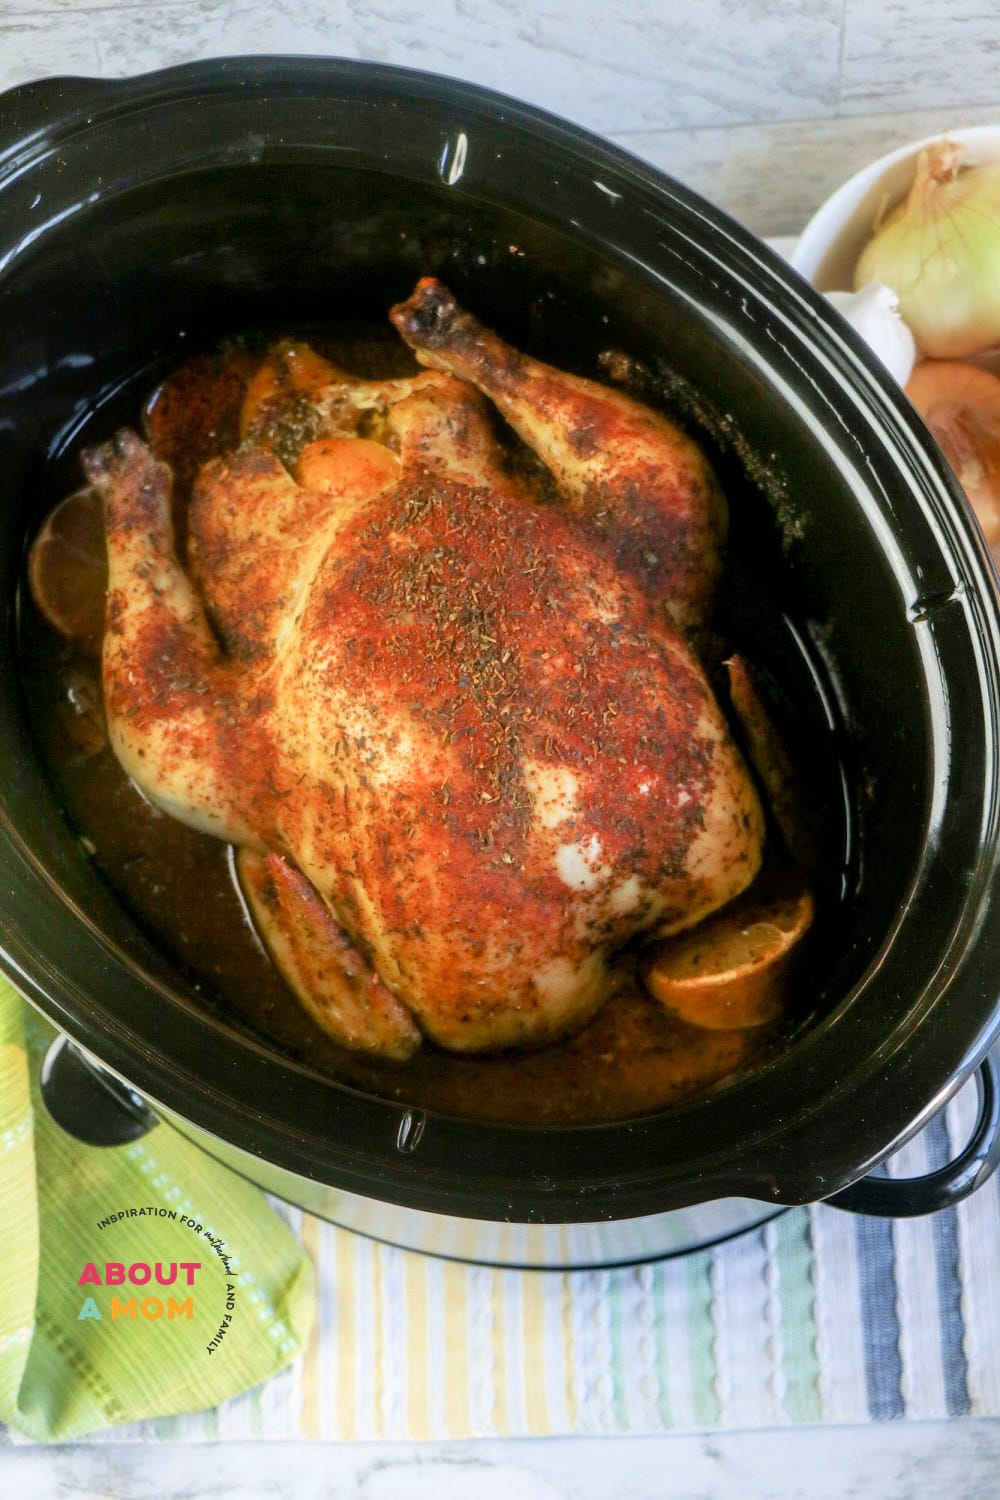 If your looking for a recipe to fill your significant other's heart with love and maybe ideas, then this recipe is for you. This moist and tender slow cooker whole chicken recipe, also known as engagement chicken, is exactly what you need.